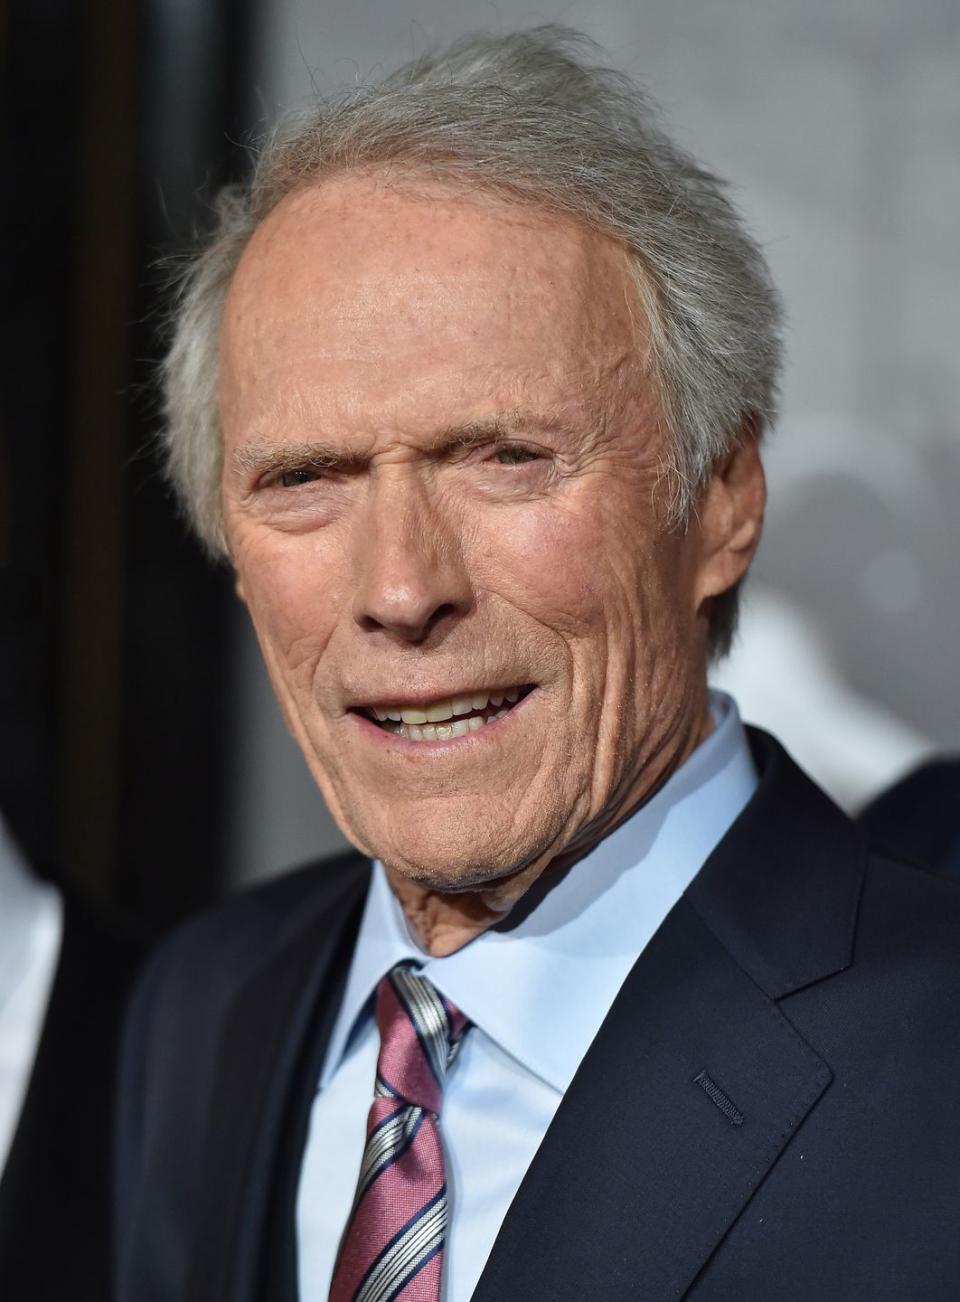 Clint Eastwood at 87